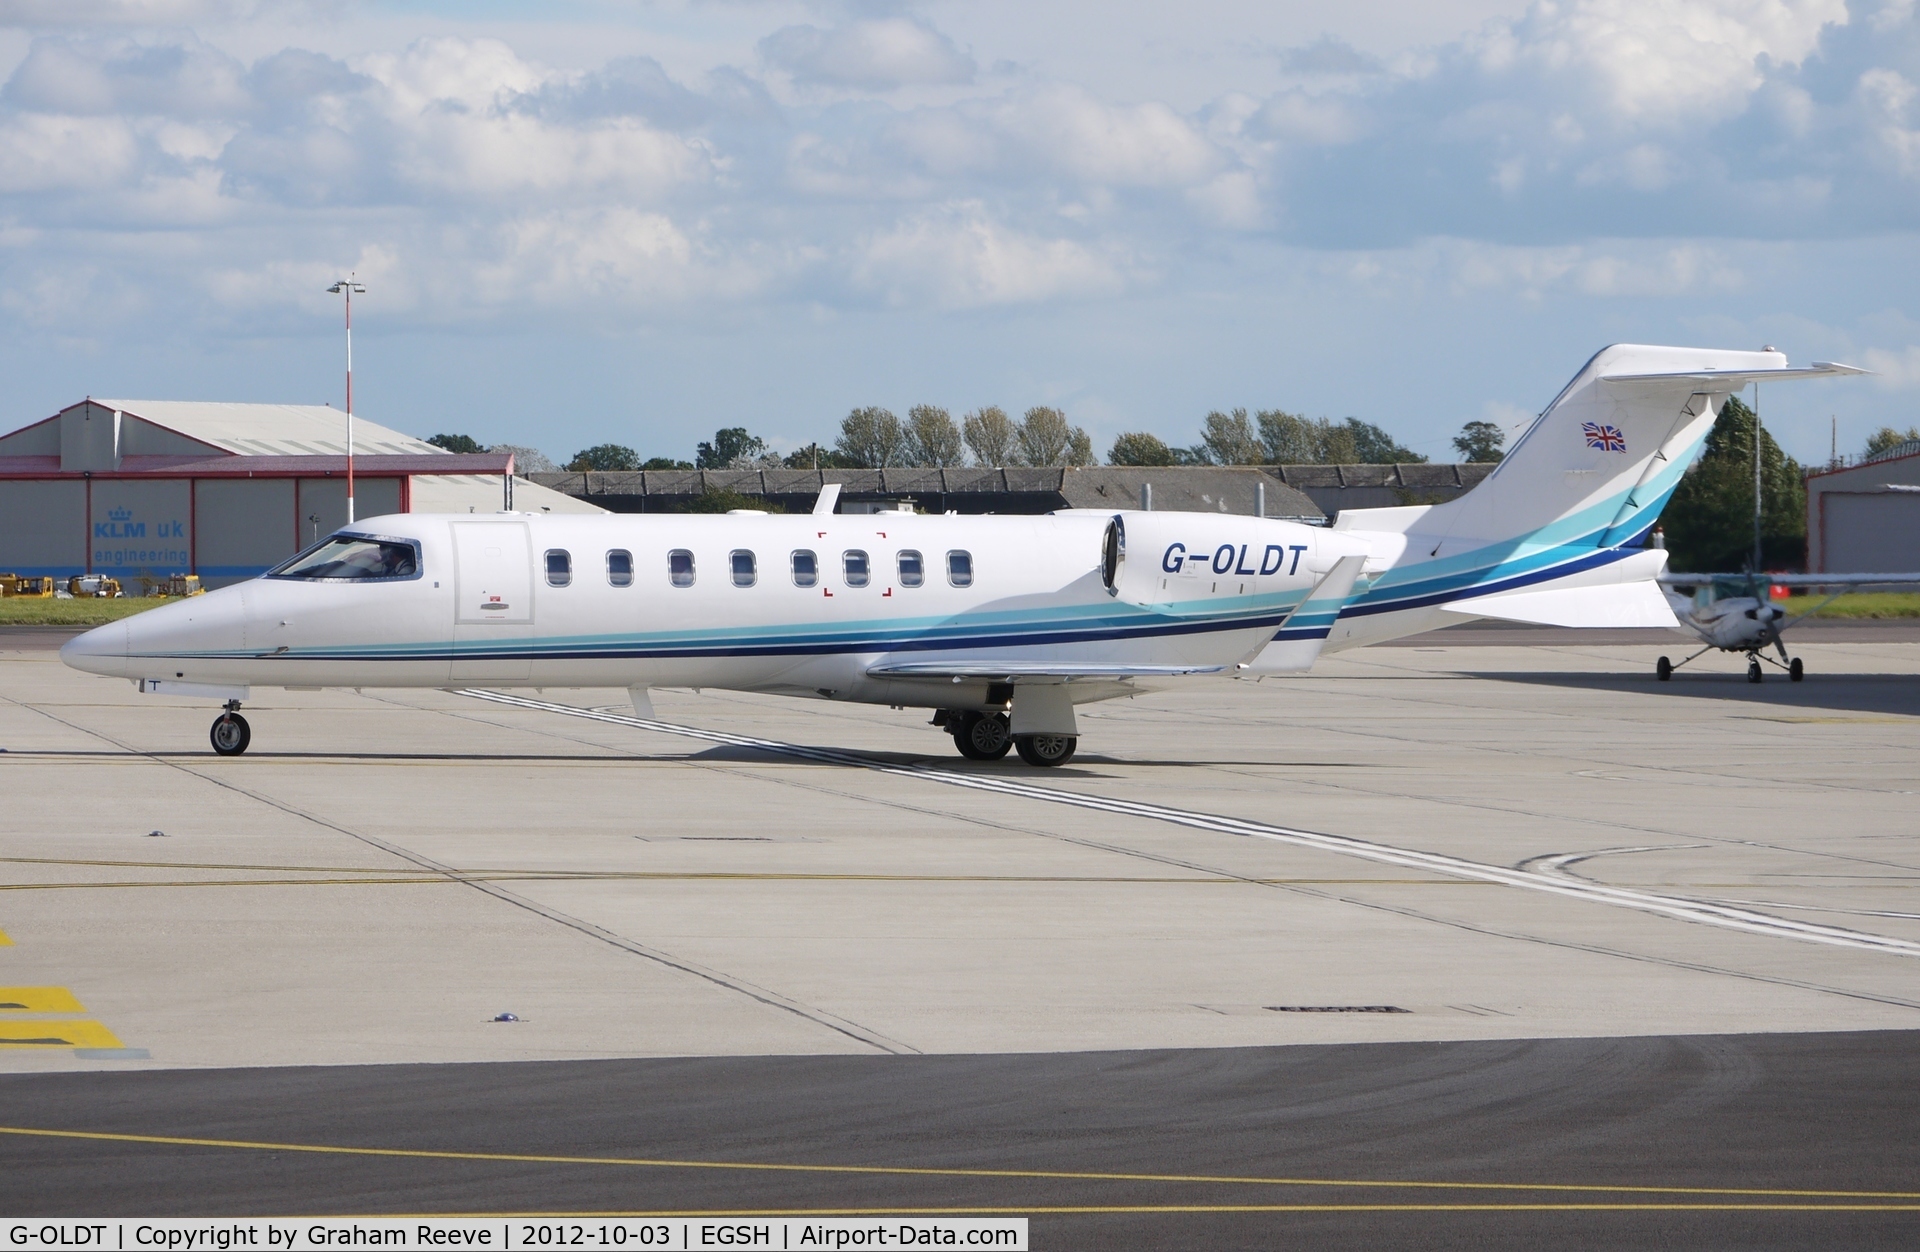 G-OLDT, 2005 Learjet 45 C/N 45-265, About to depart.